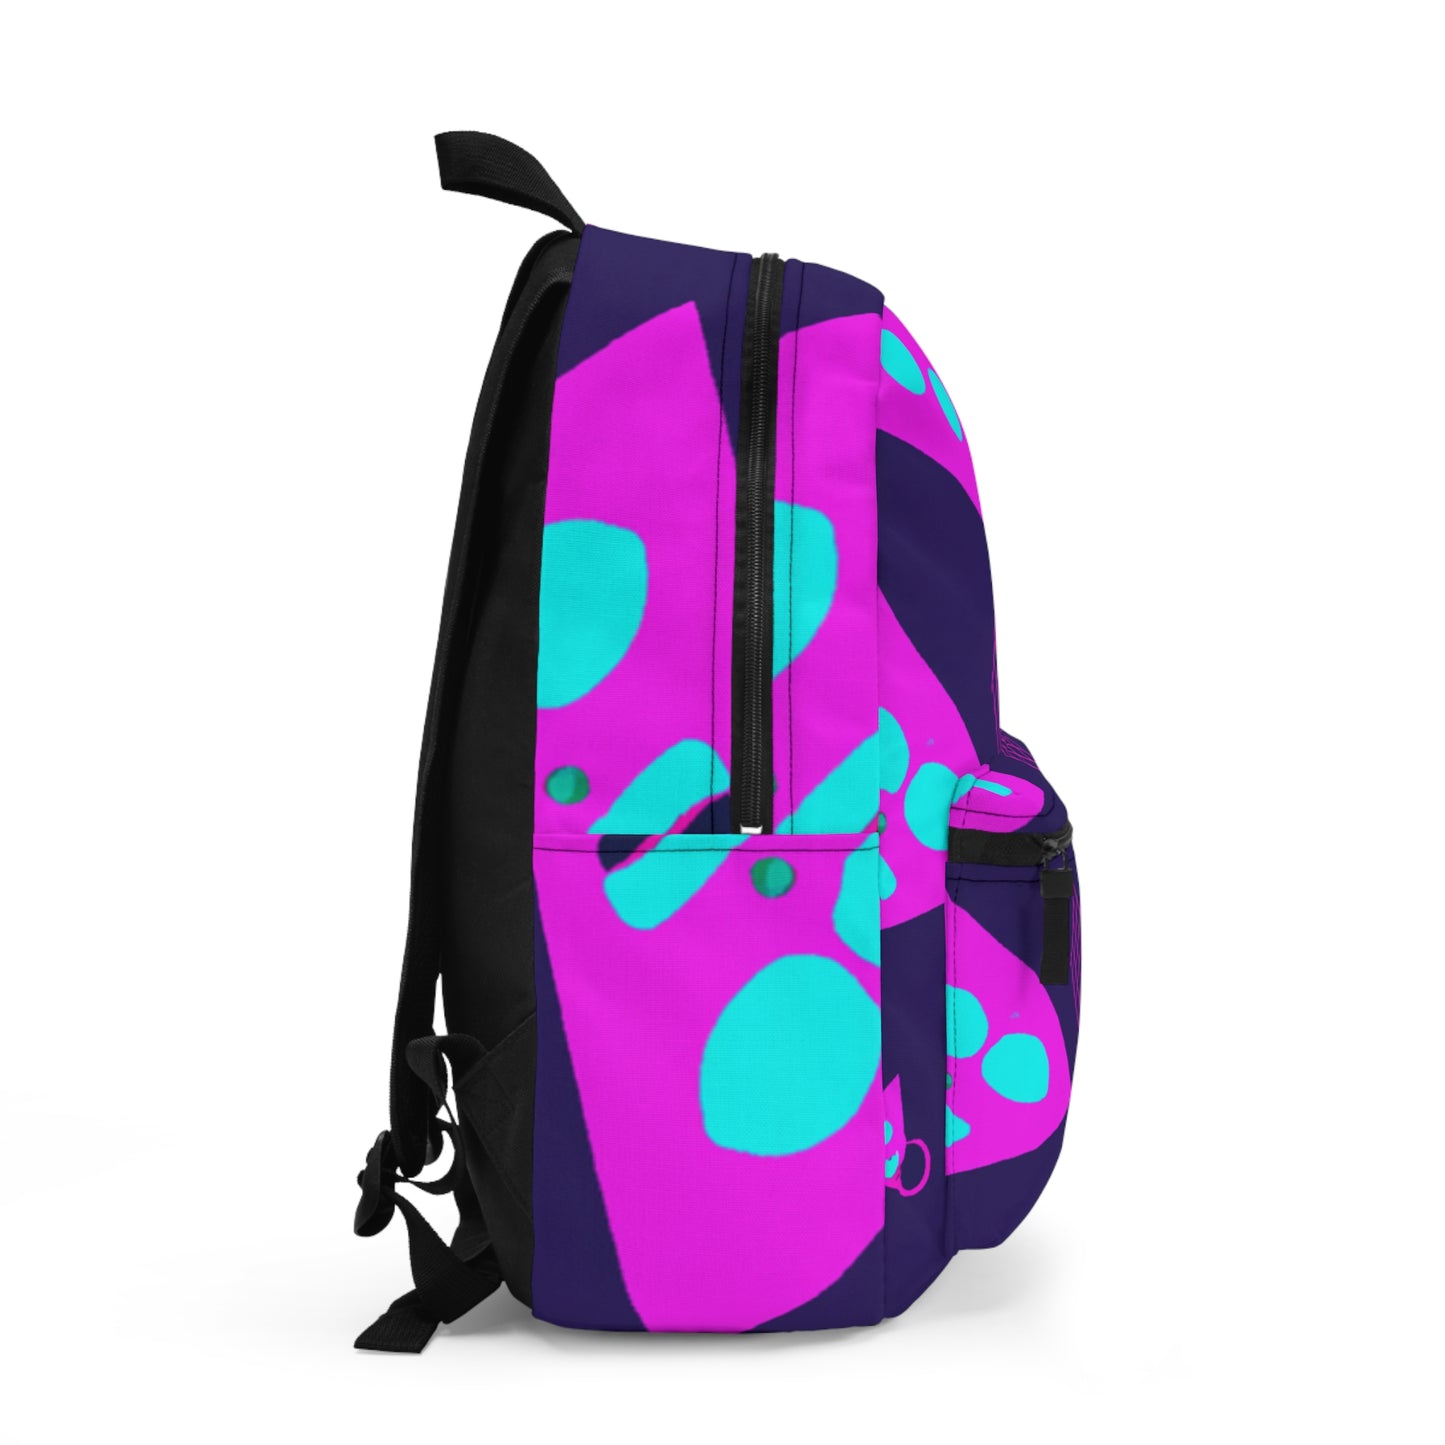 Yleath Sioni - Backpack